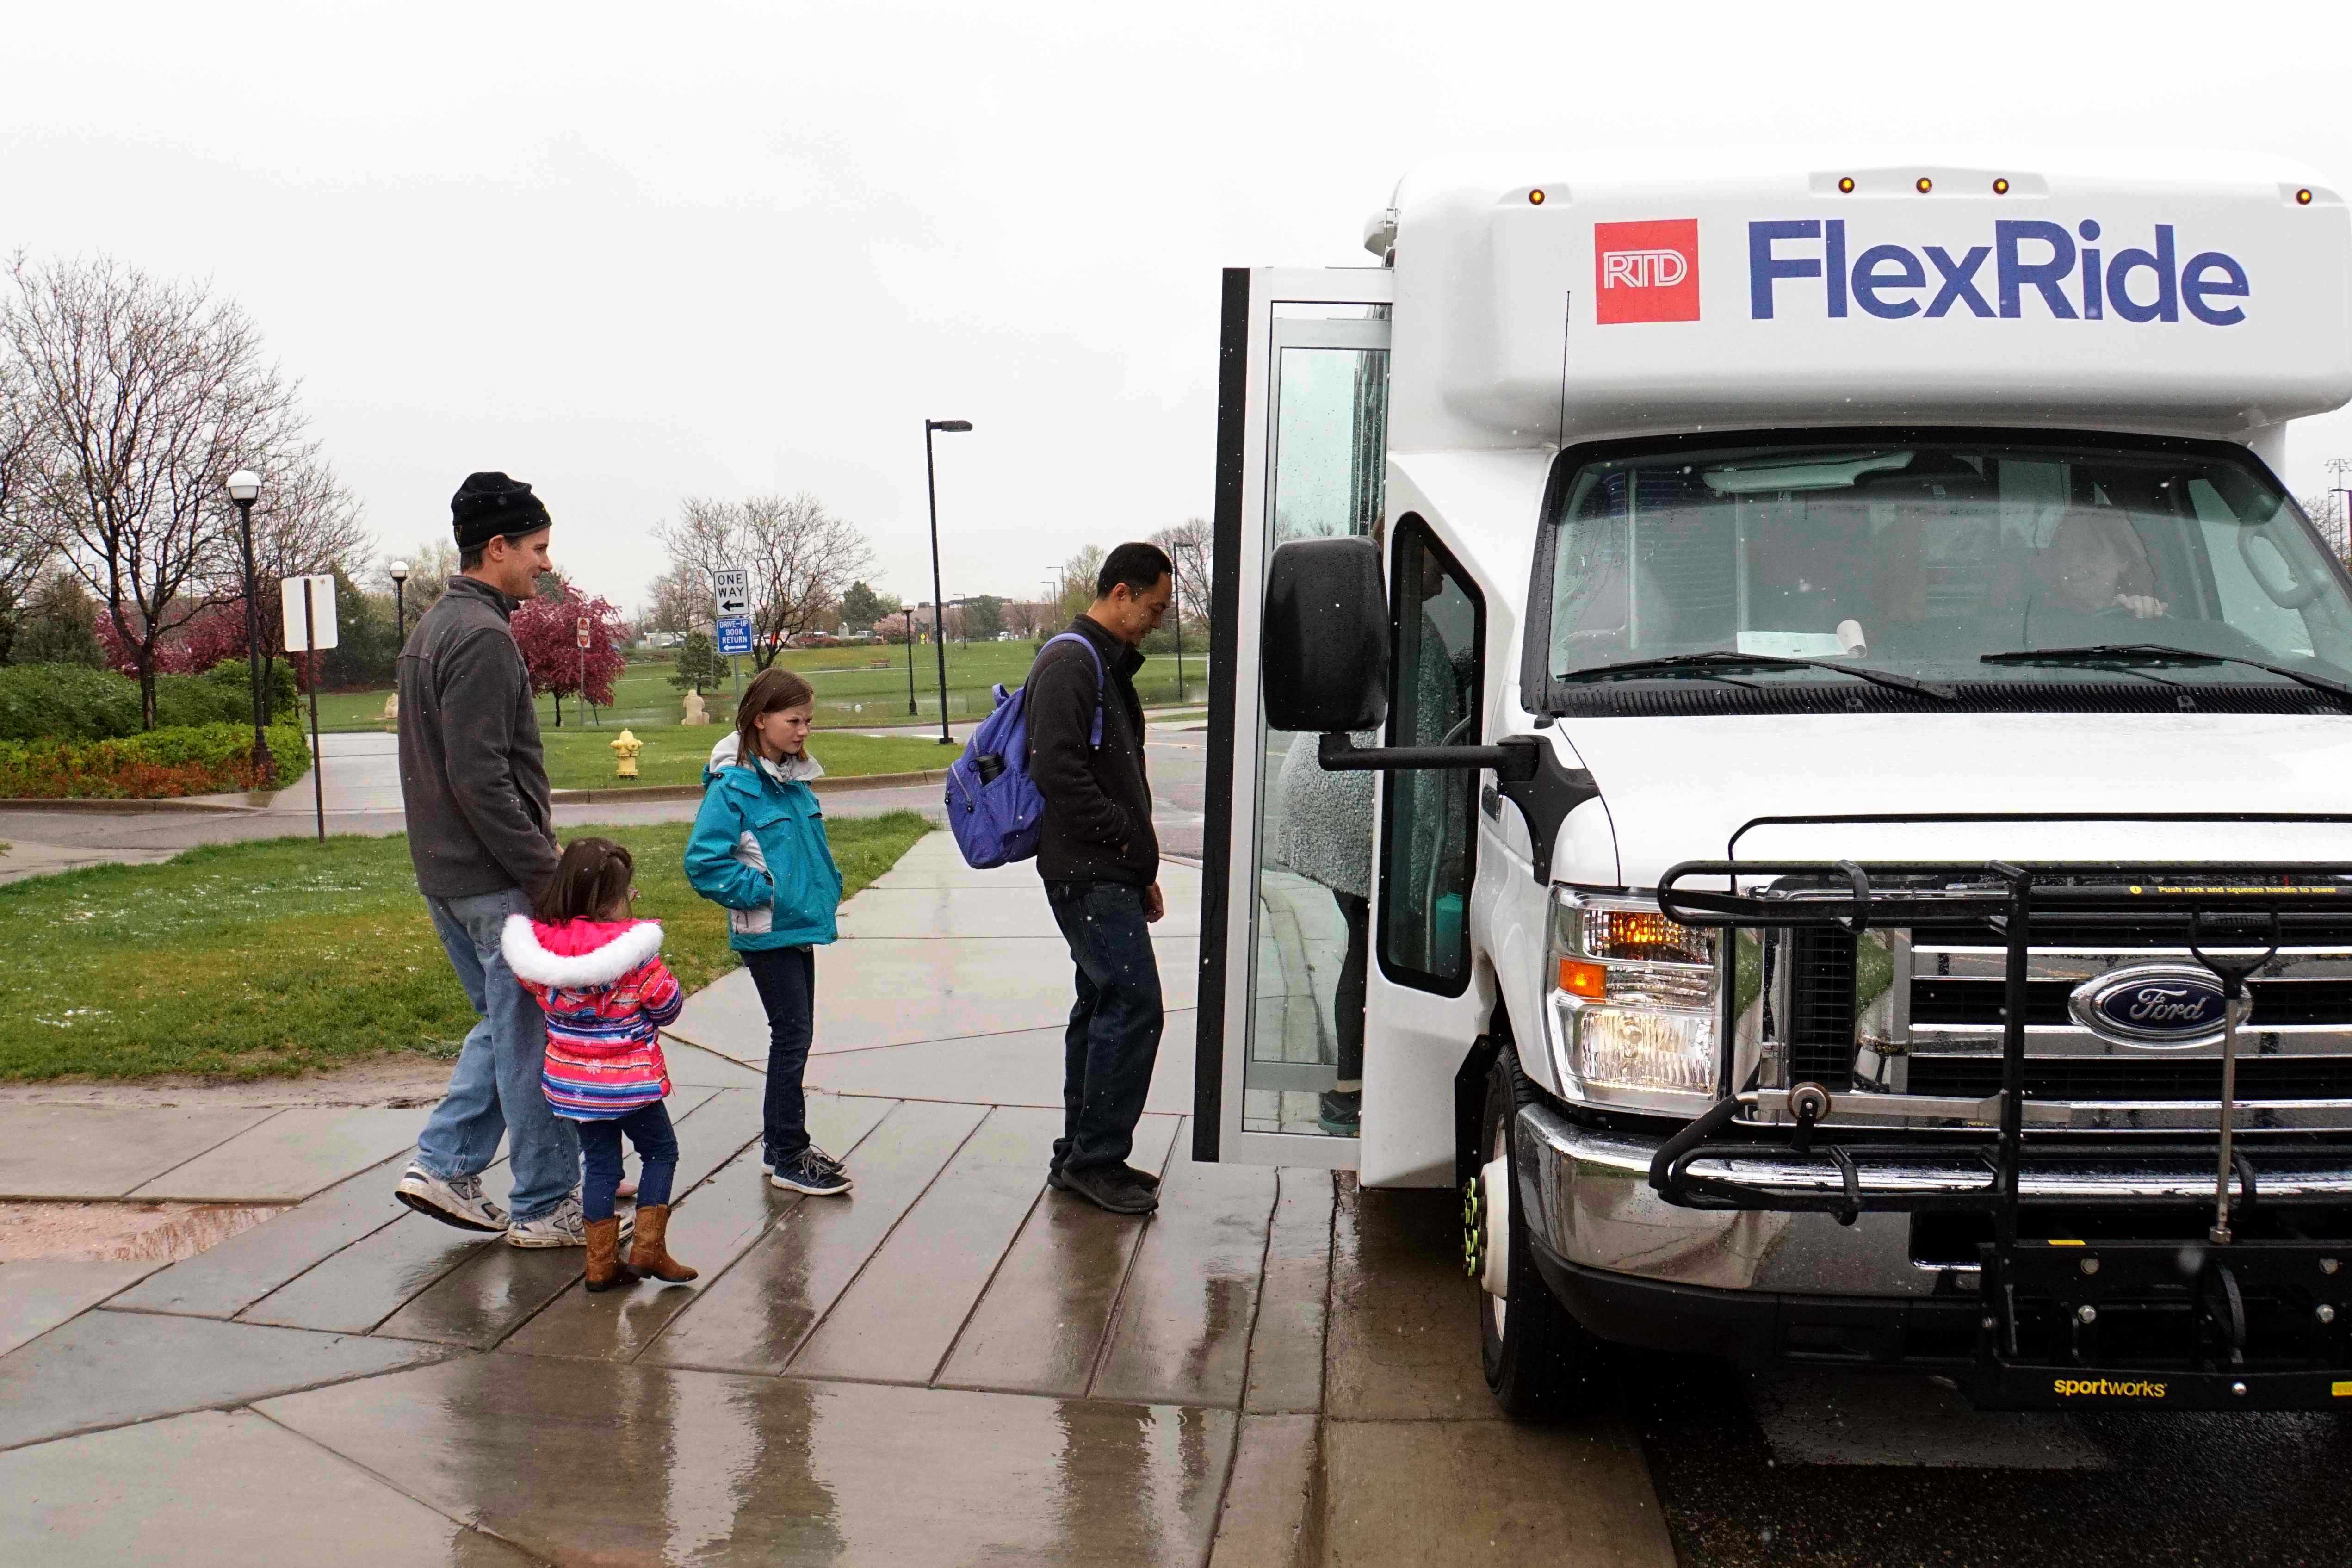 Kids and adults waiting in line to board the FlexRide bus.